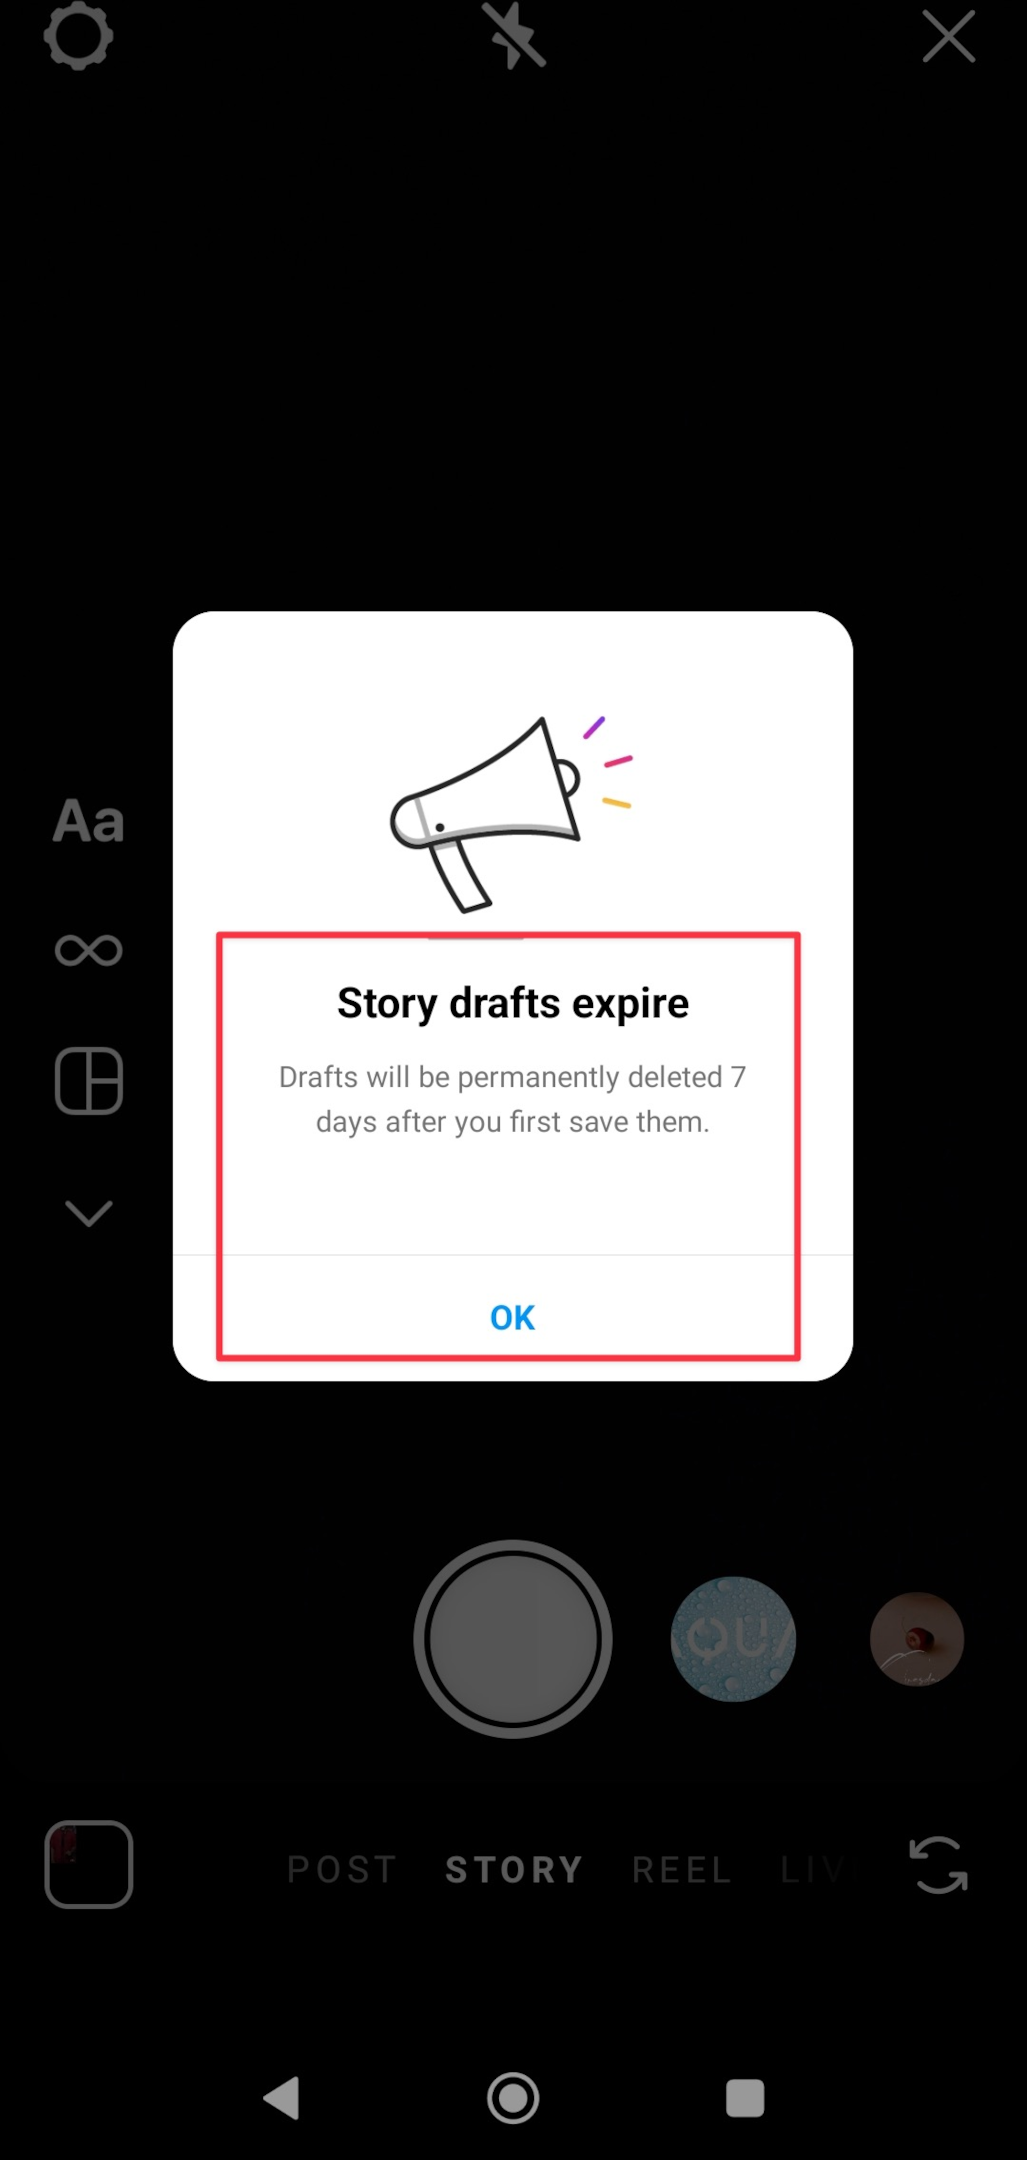 Remote.tools shows a pop up that story drafts will be saved for 7 days only